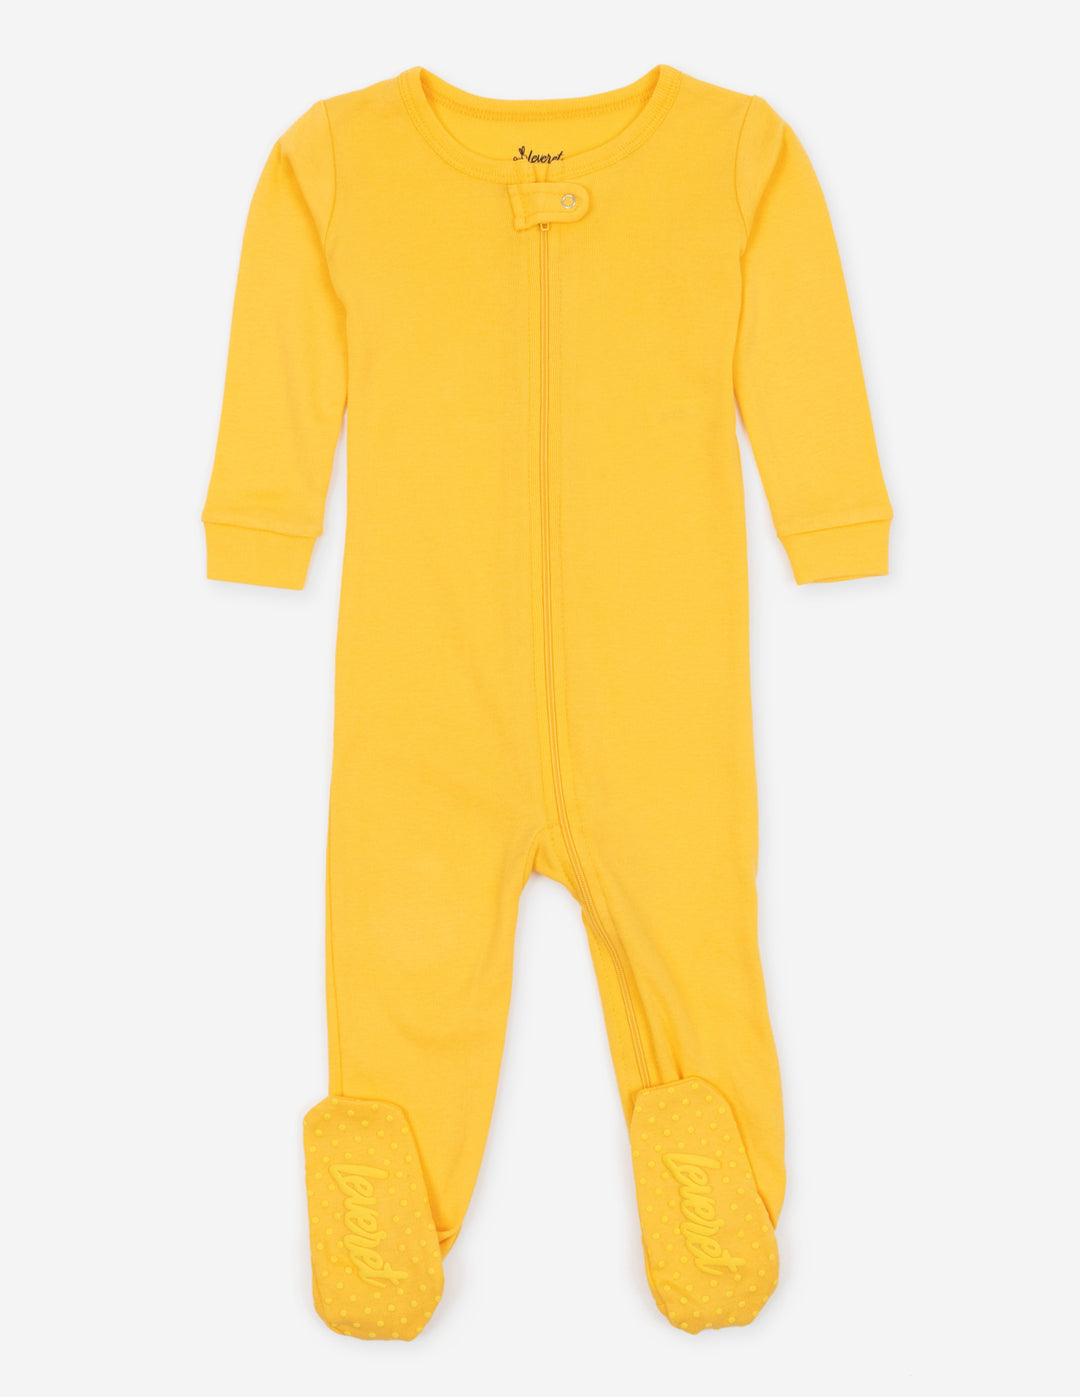 solid color yellow baby footed pajamas